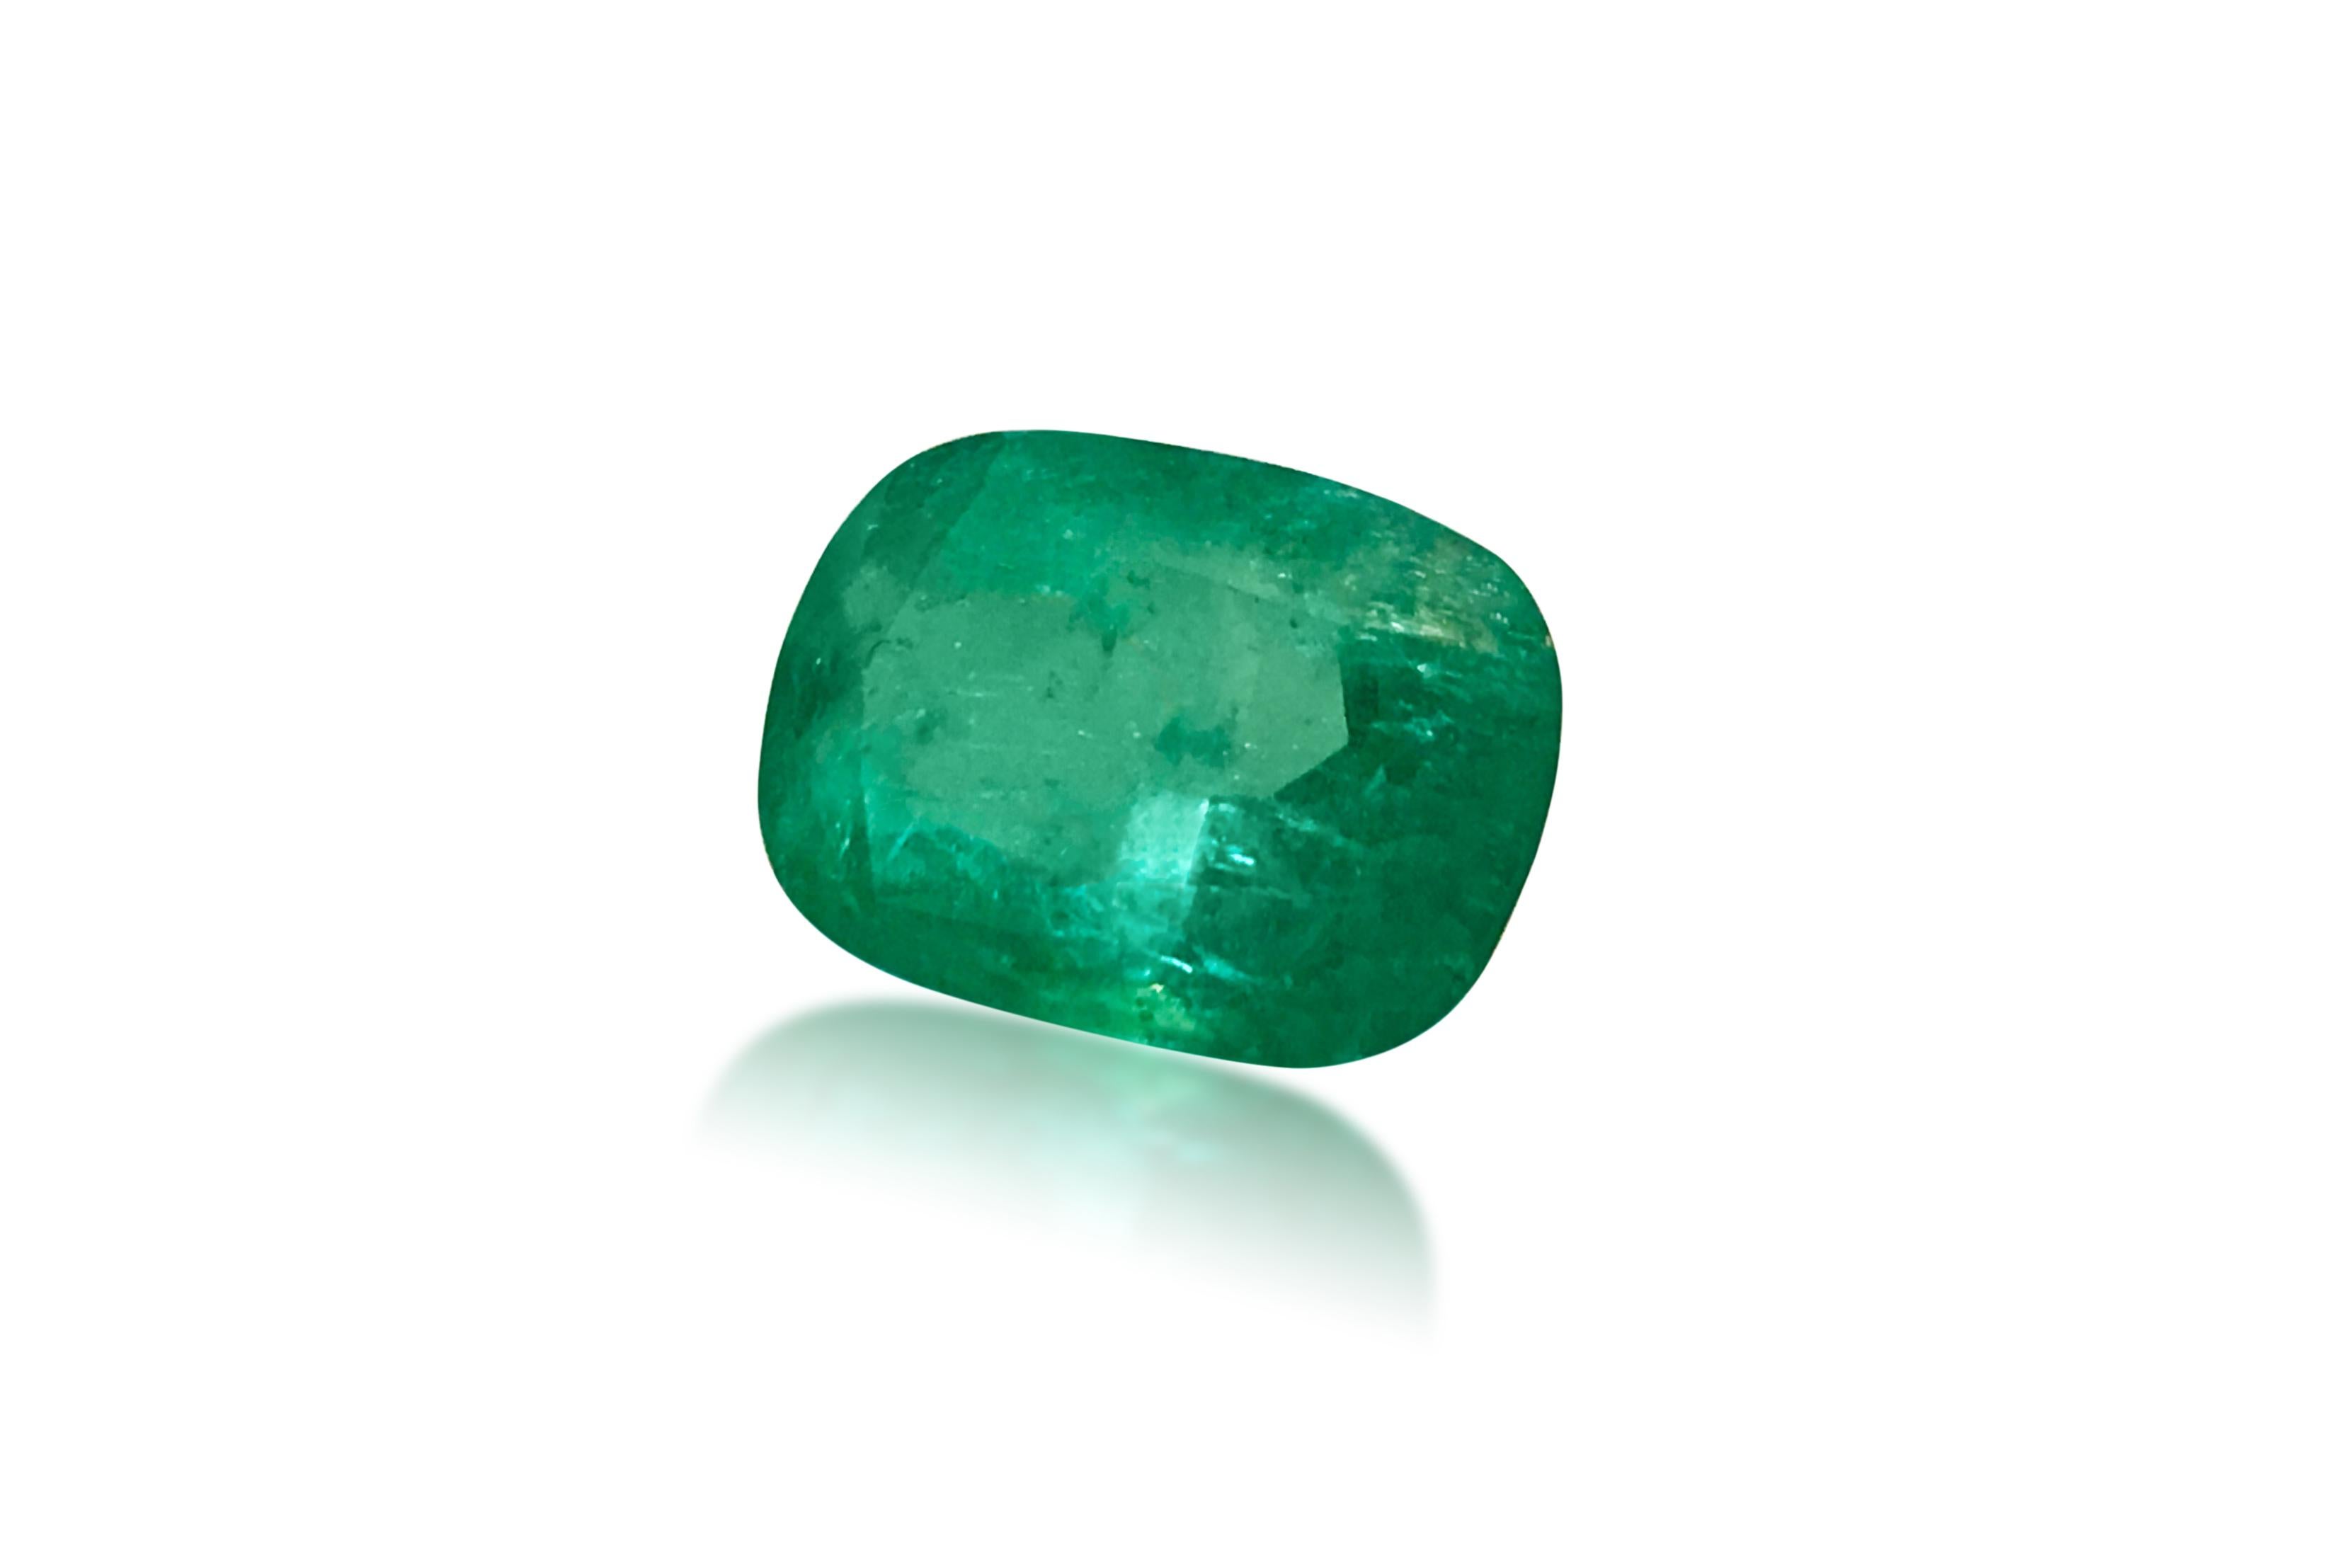 15.50 carat loose emerald. 
Superb loose emerald. 3.40 x 8.80 mm. Deep color and shine. Strong green color. 100% natural earth mined Colombain emerald. Vivid color and saturation. Perfect loose gemstone to set in rings, pendants and other pieces of